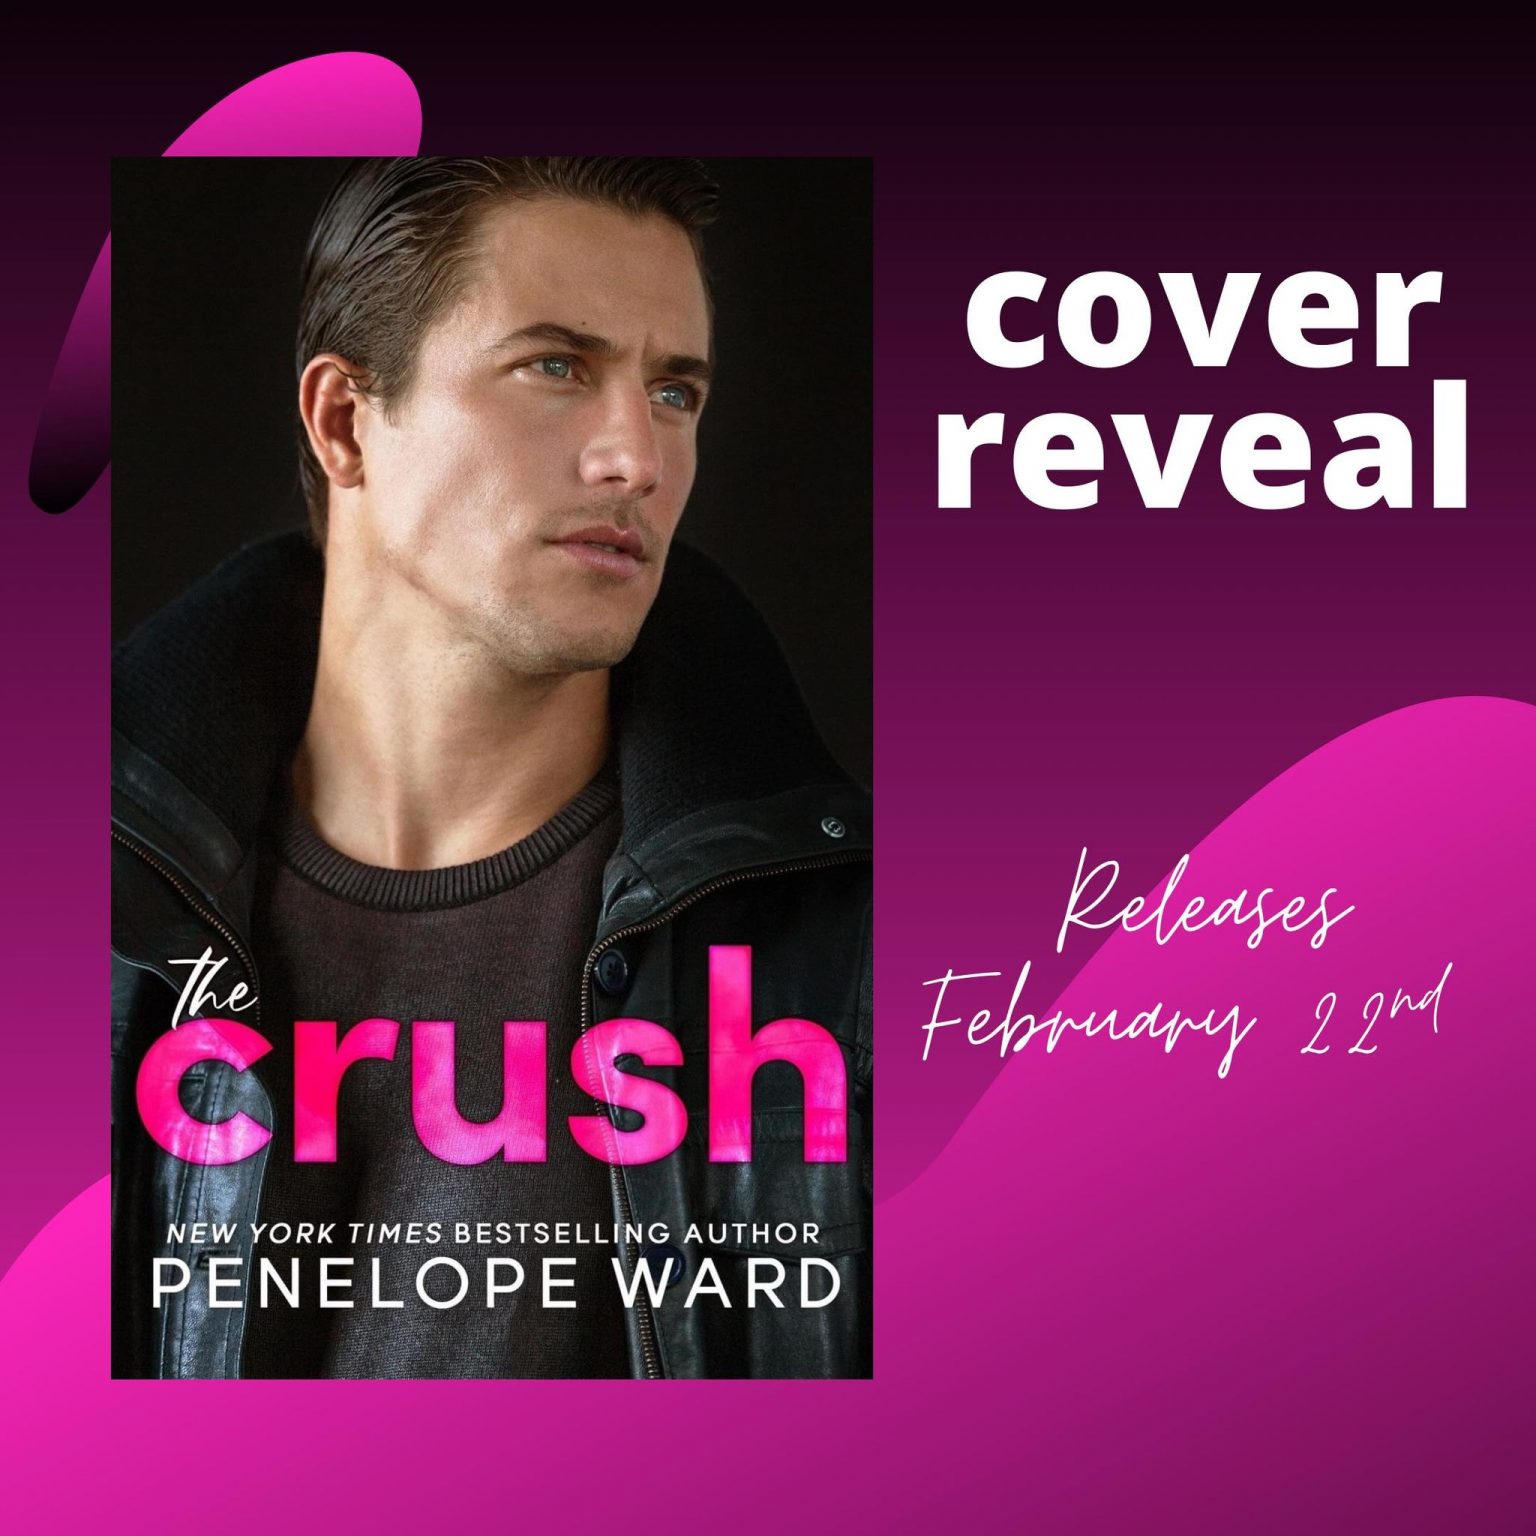 the crush by penelope ward